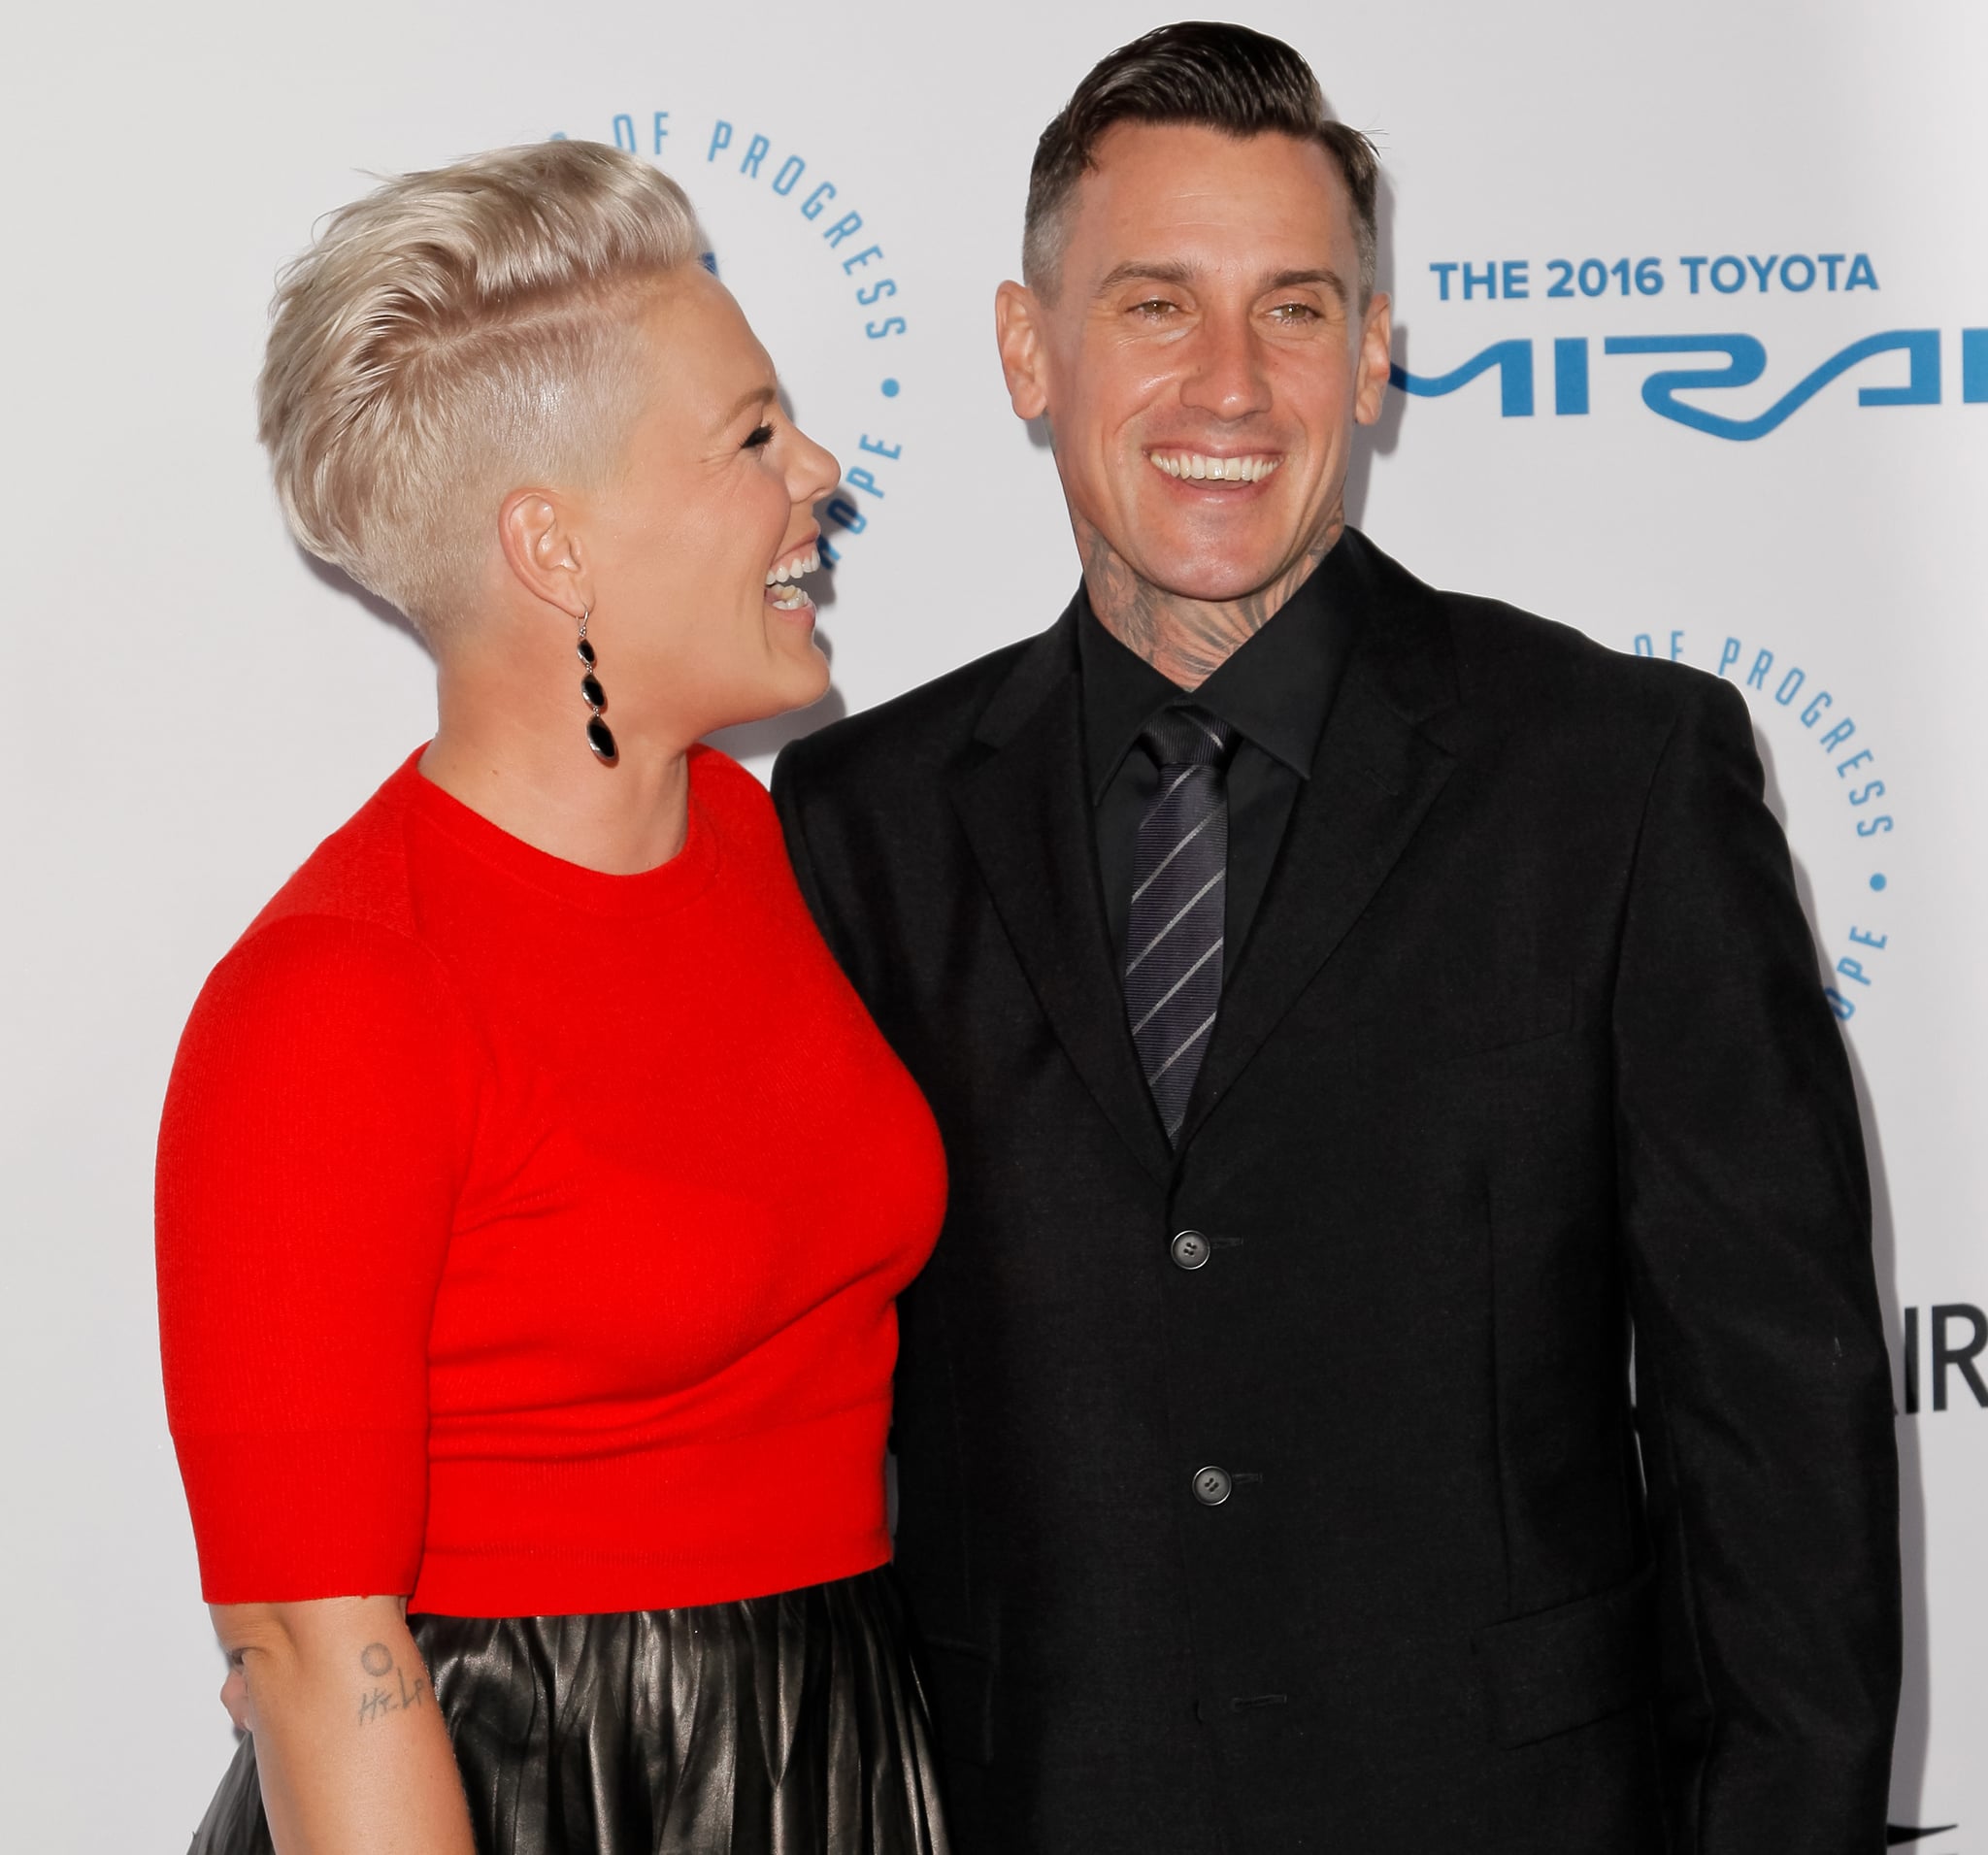 Pink and Carey Hart are. they have a cute family. one of our favorite celeb...